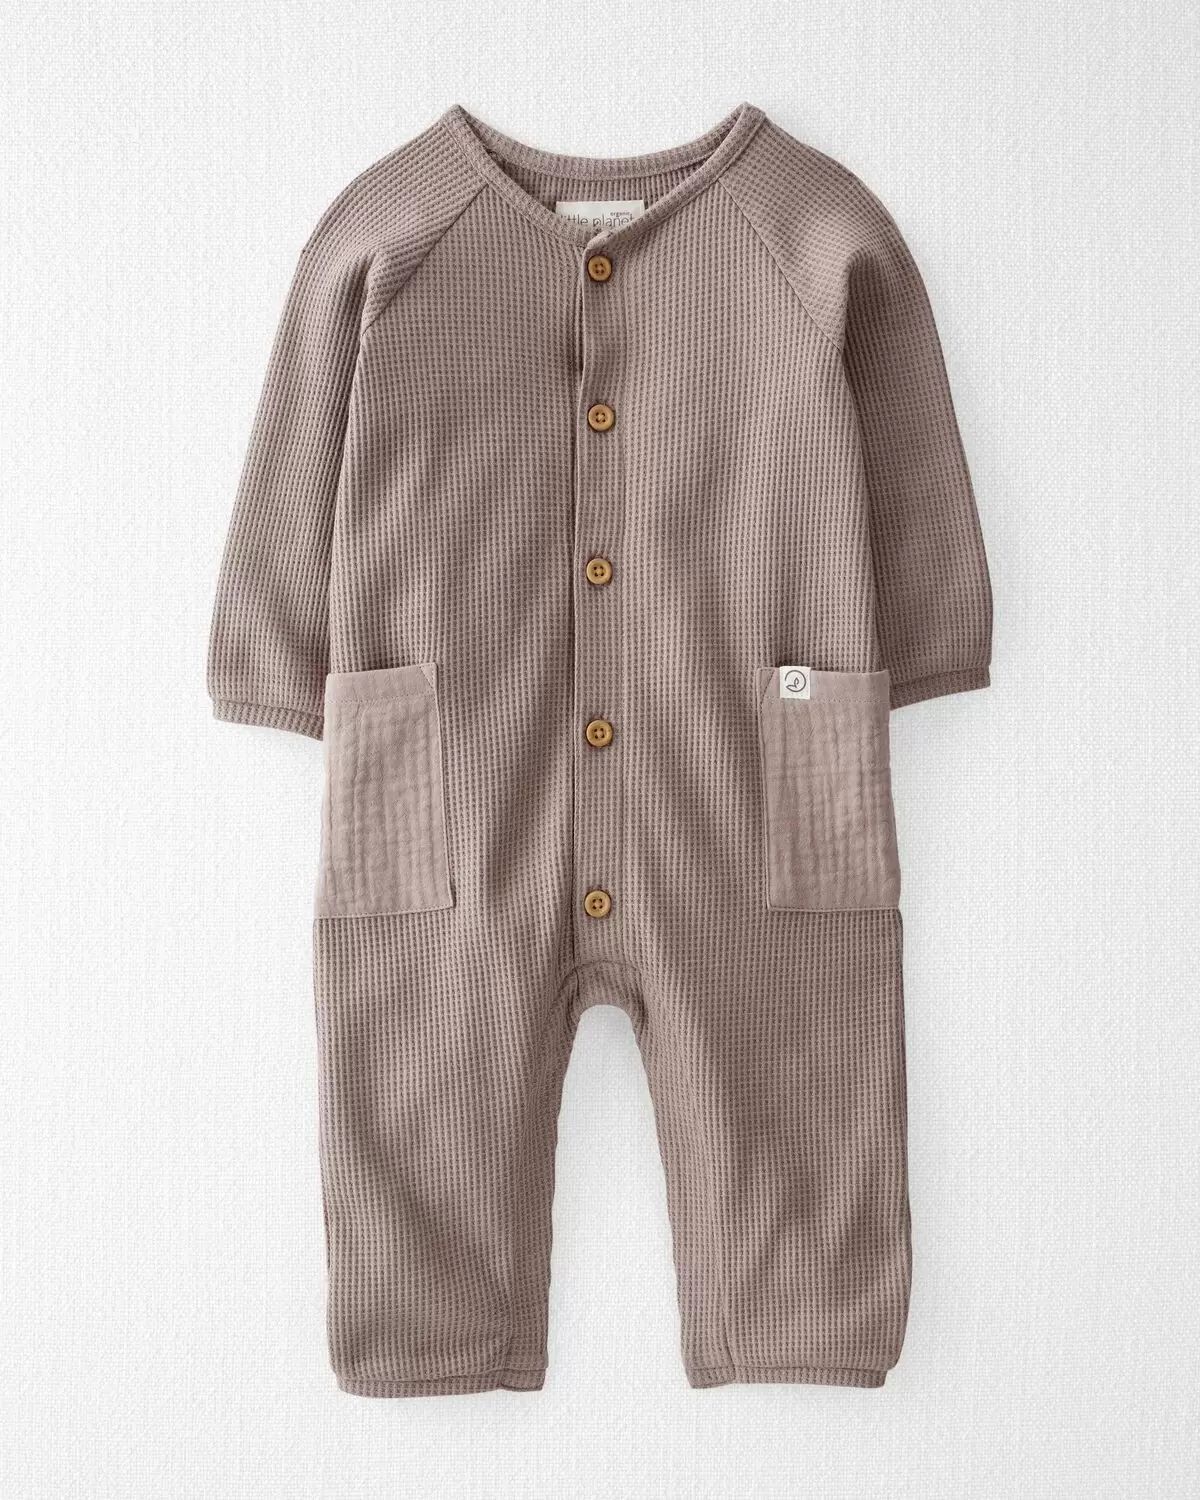 Washed Taupe Baby Waffle Knit Jumpsuit Made With Organic Cotton in Taupe | carters.com | Carter's